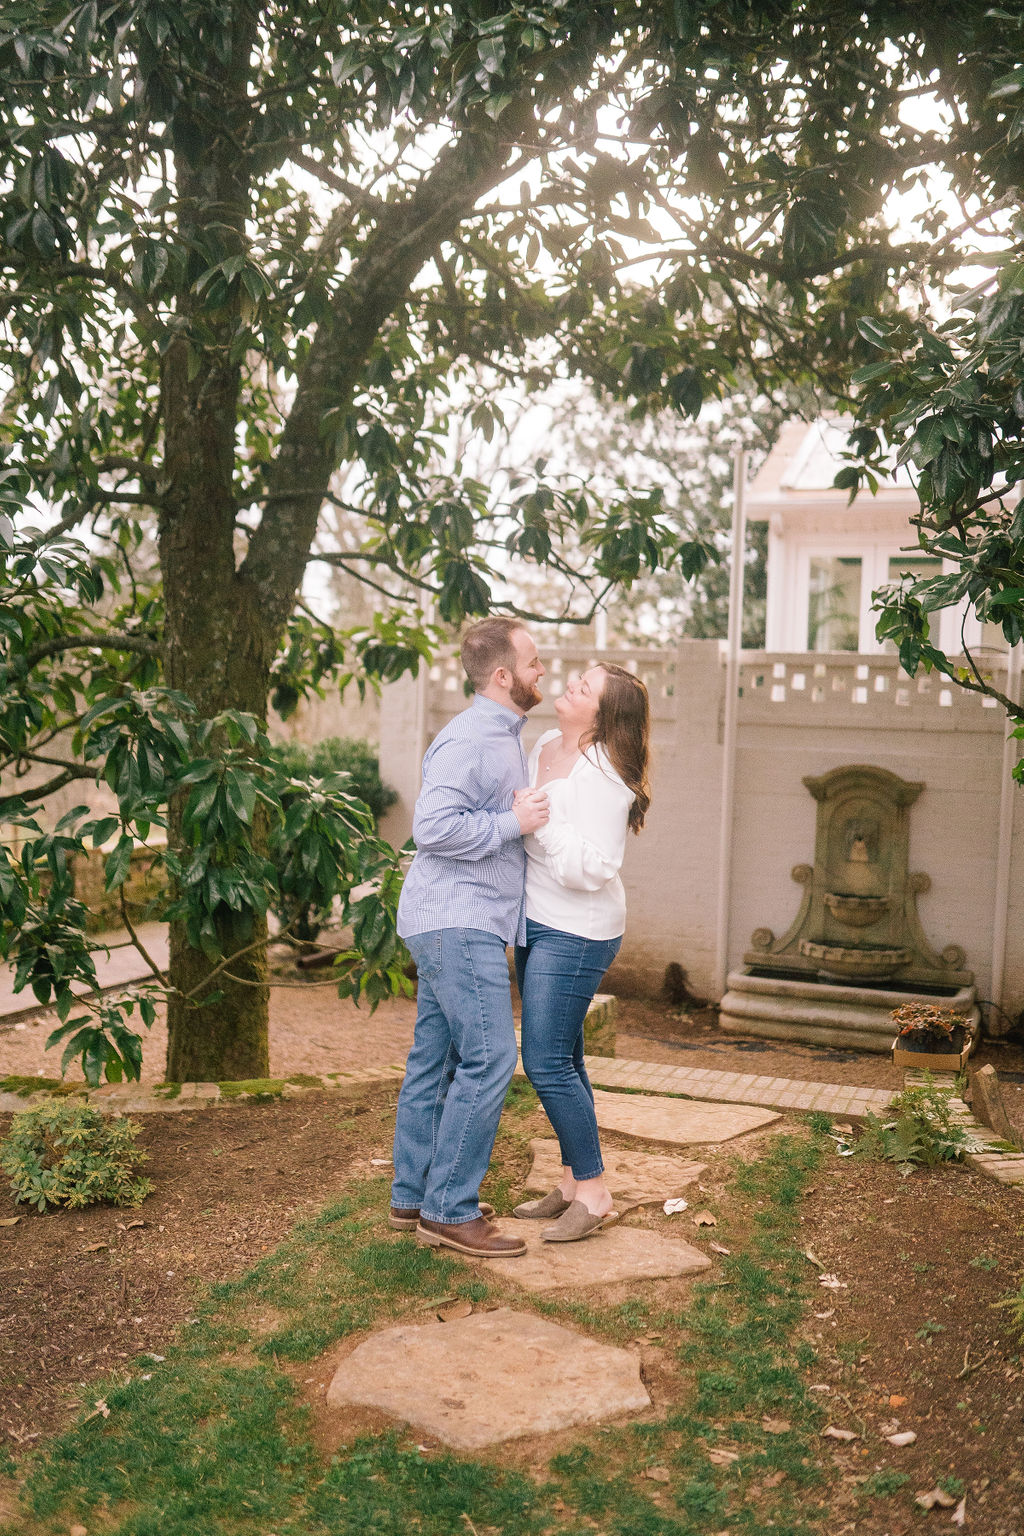 dancing in the garden together for an engagement session with southern charm